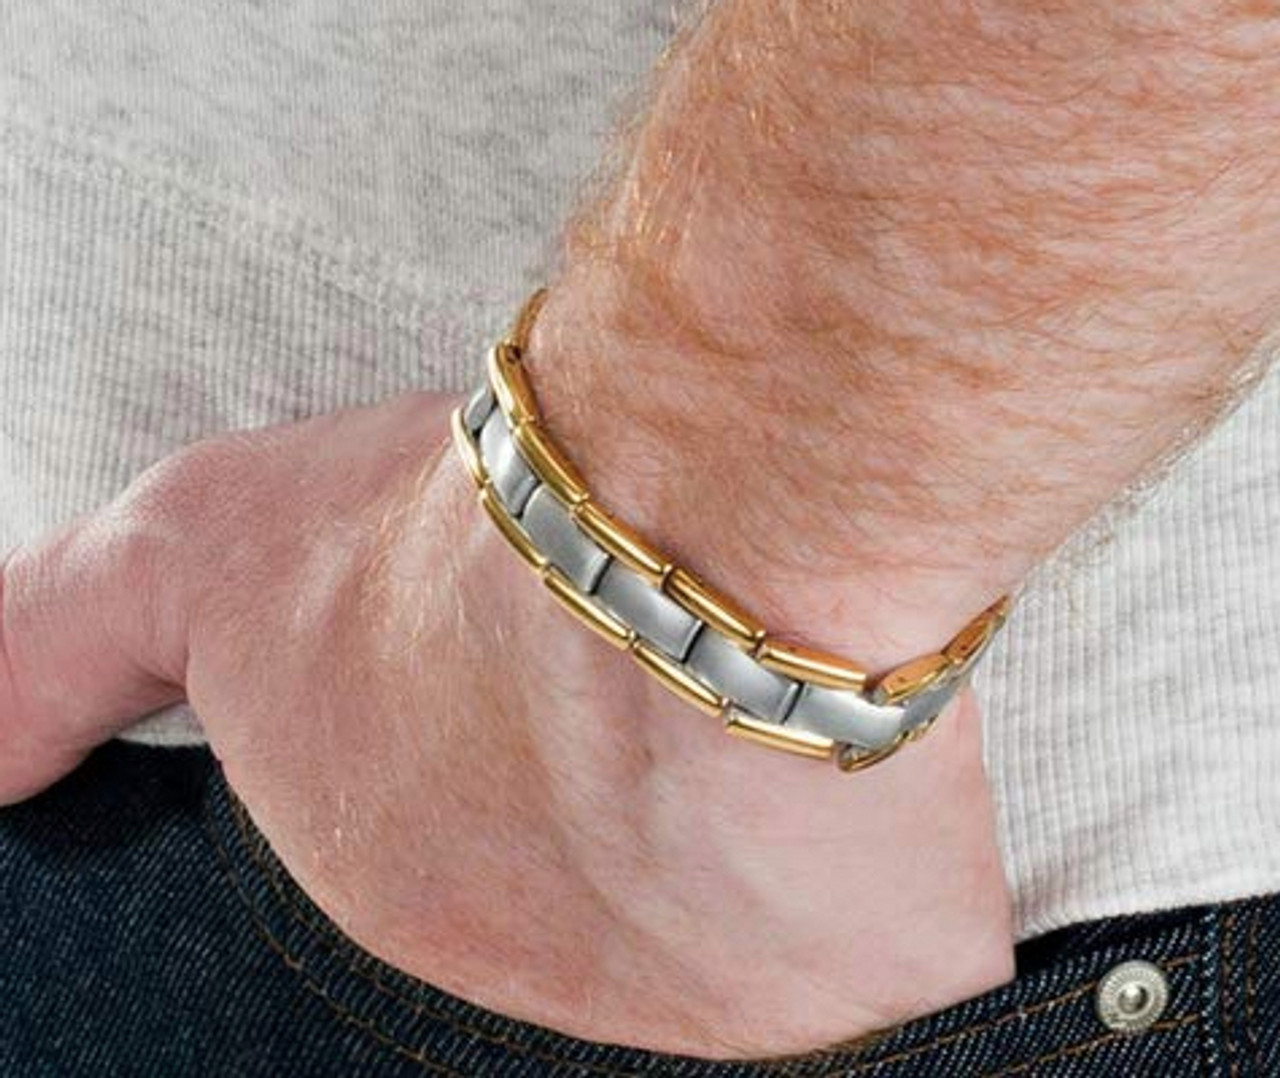 8.5" Inch Length - Men's Titanium Magnetic Bracelet - Silver and Gold Two Tone Adjustable